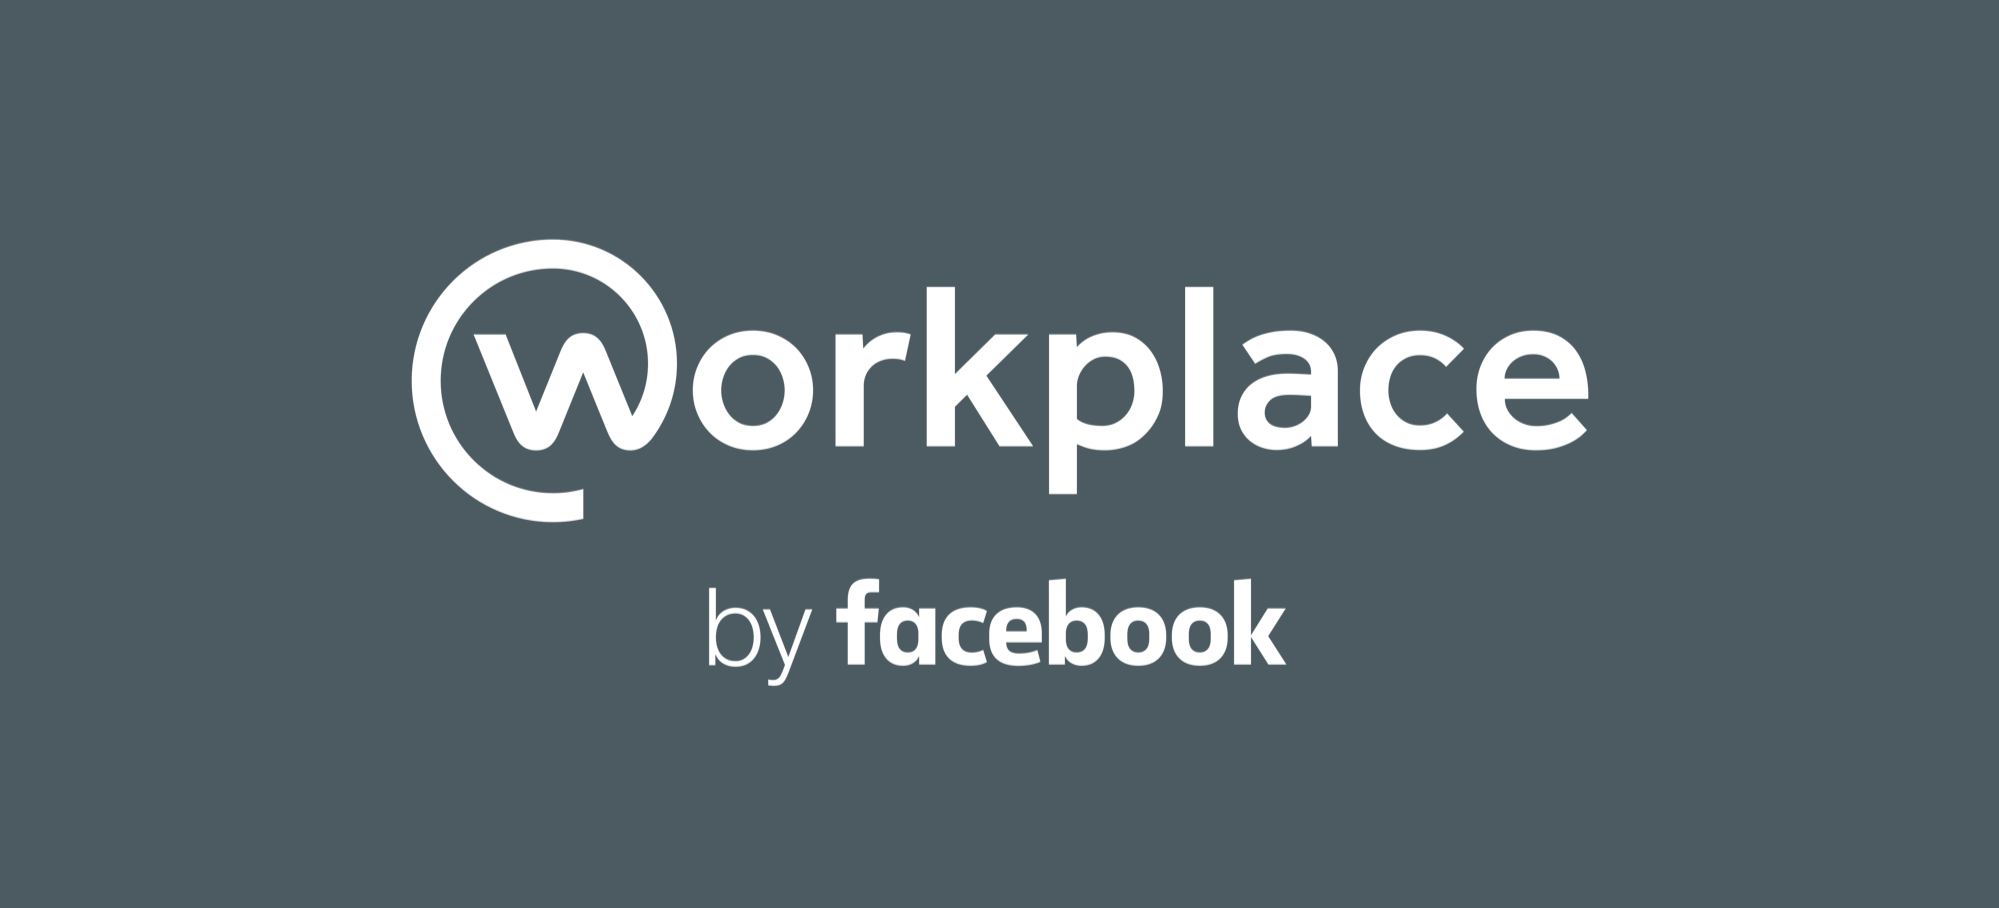 Workplace by Facebook demo